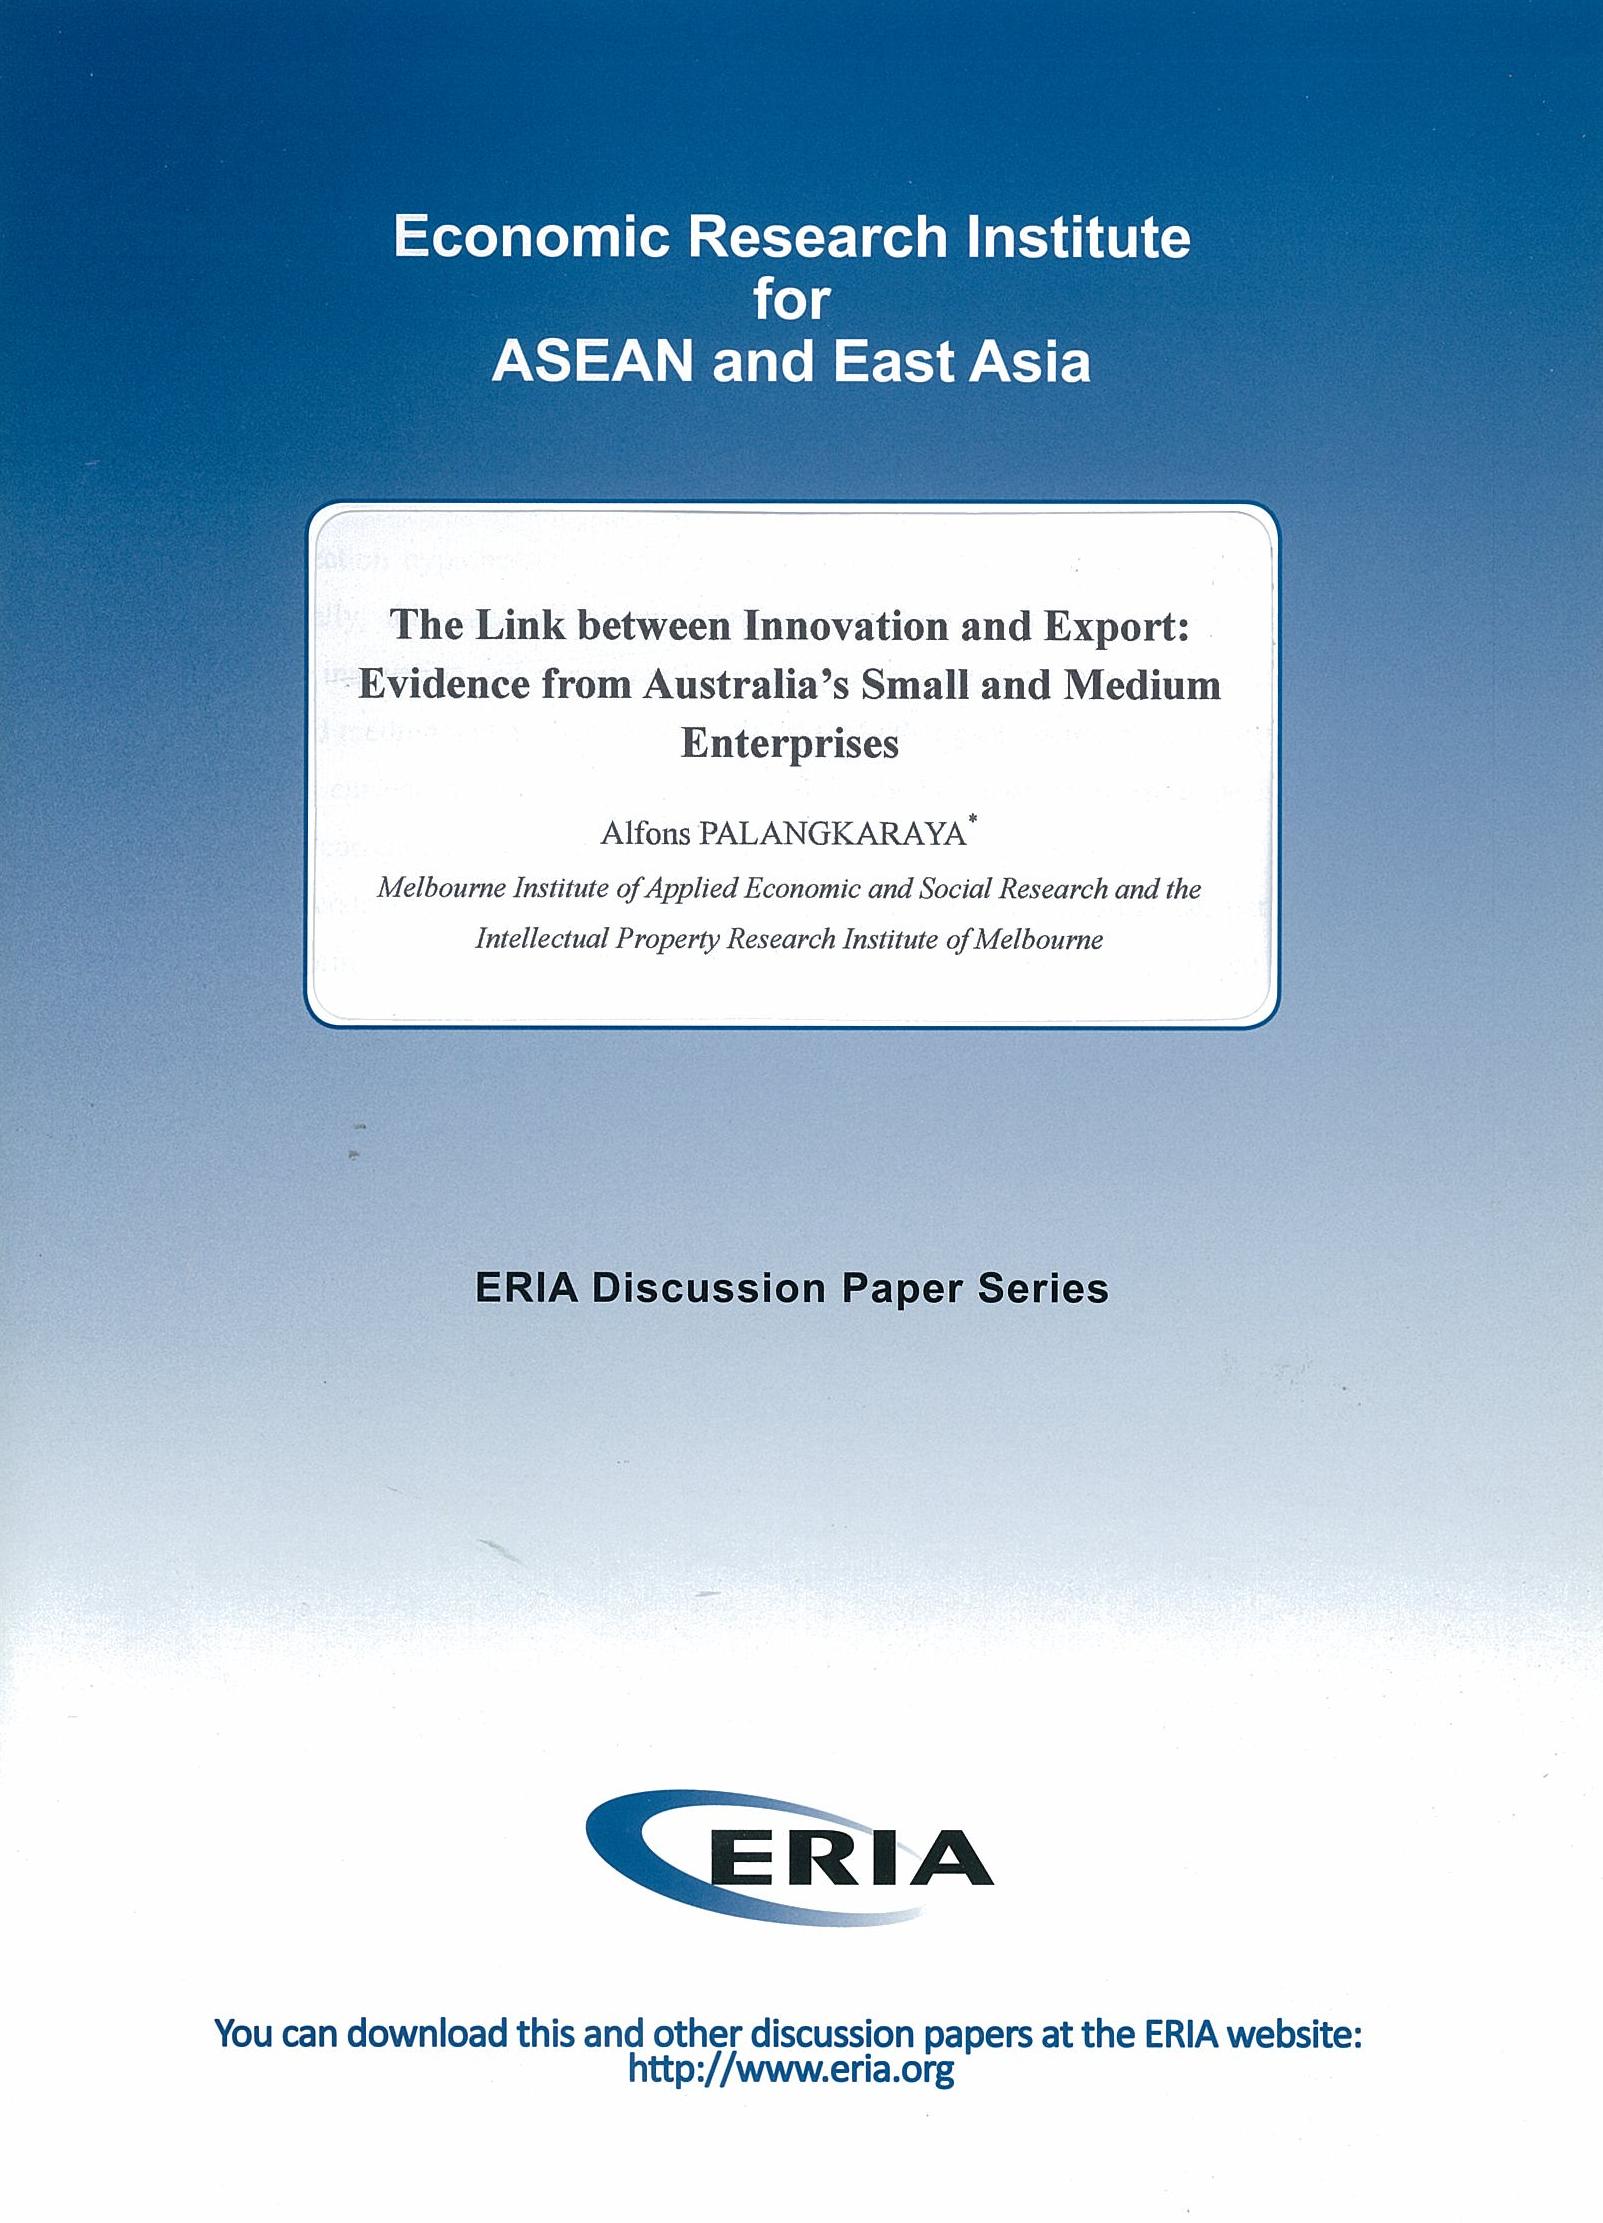 The Link between Innovation and Export: Evidence from Australia's Small and Medium Enterprises